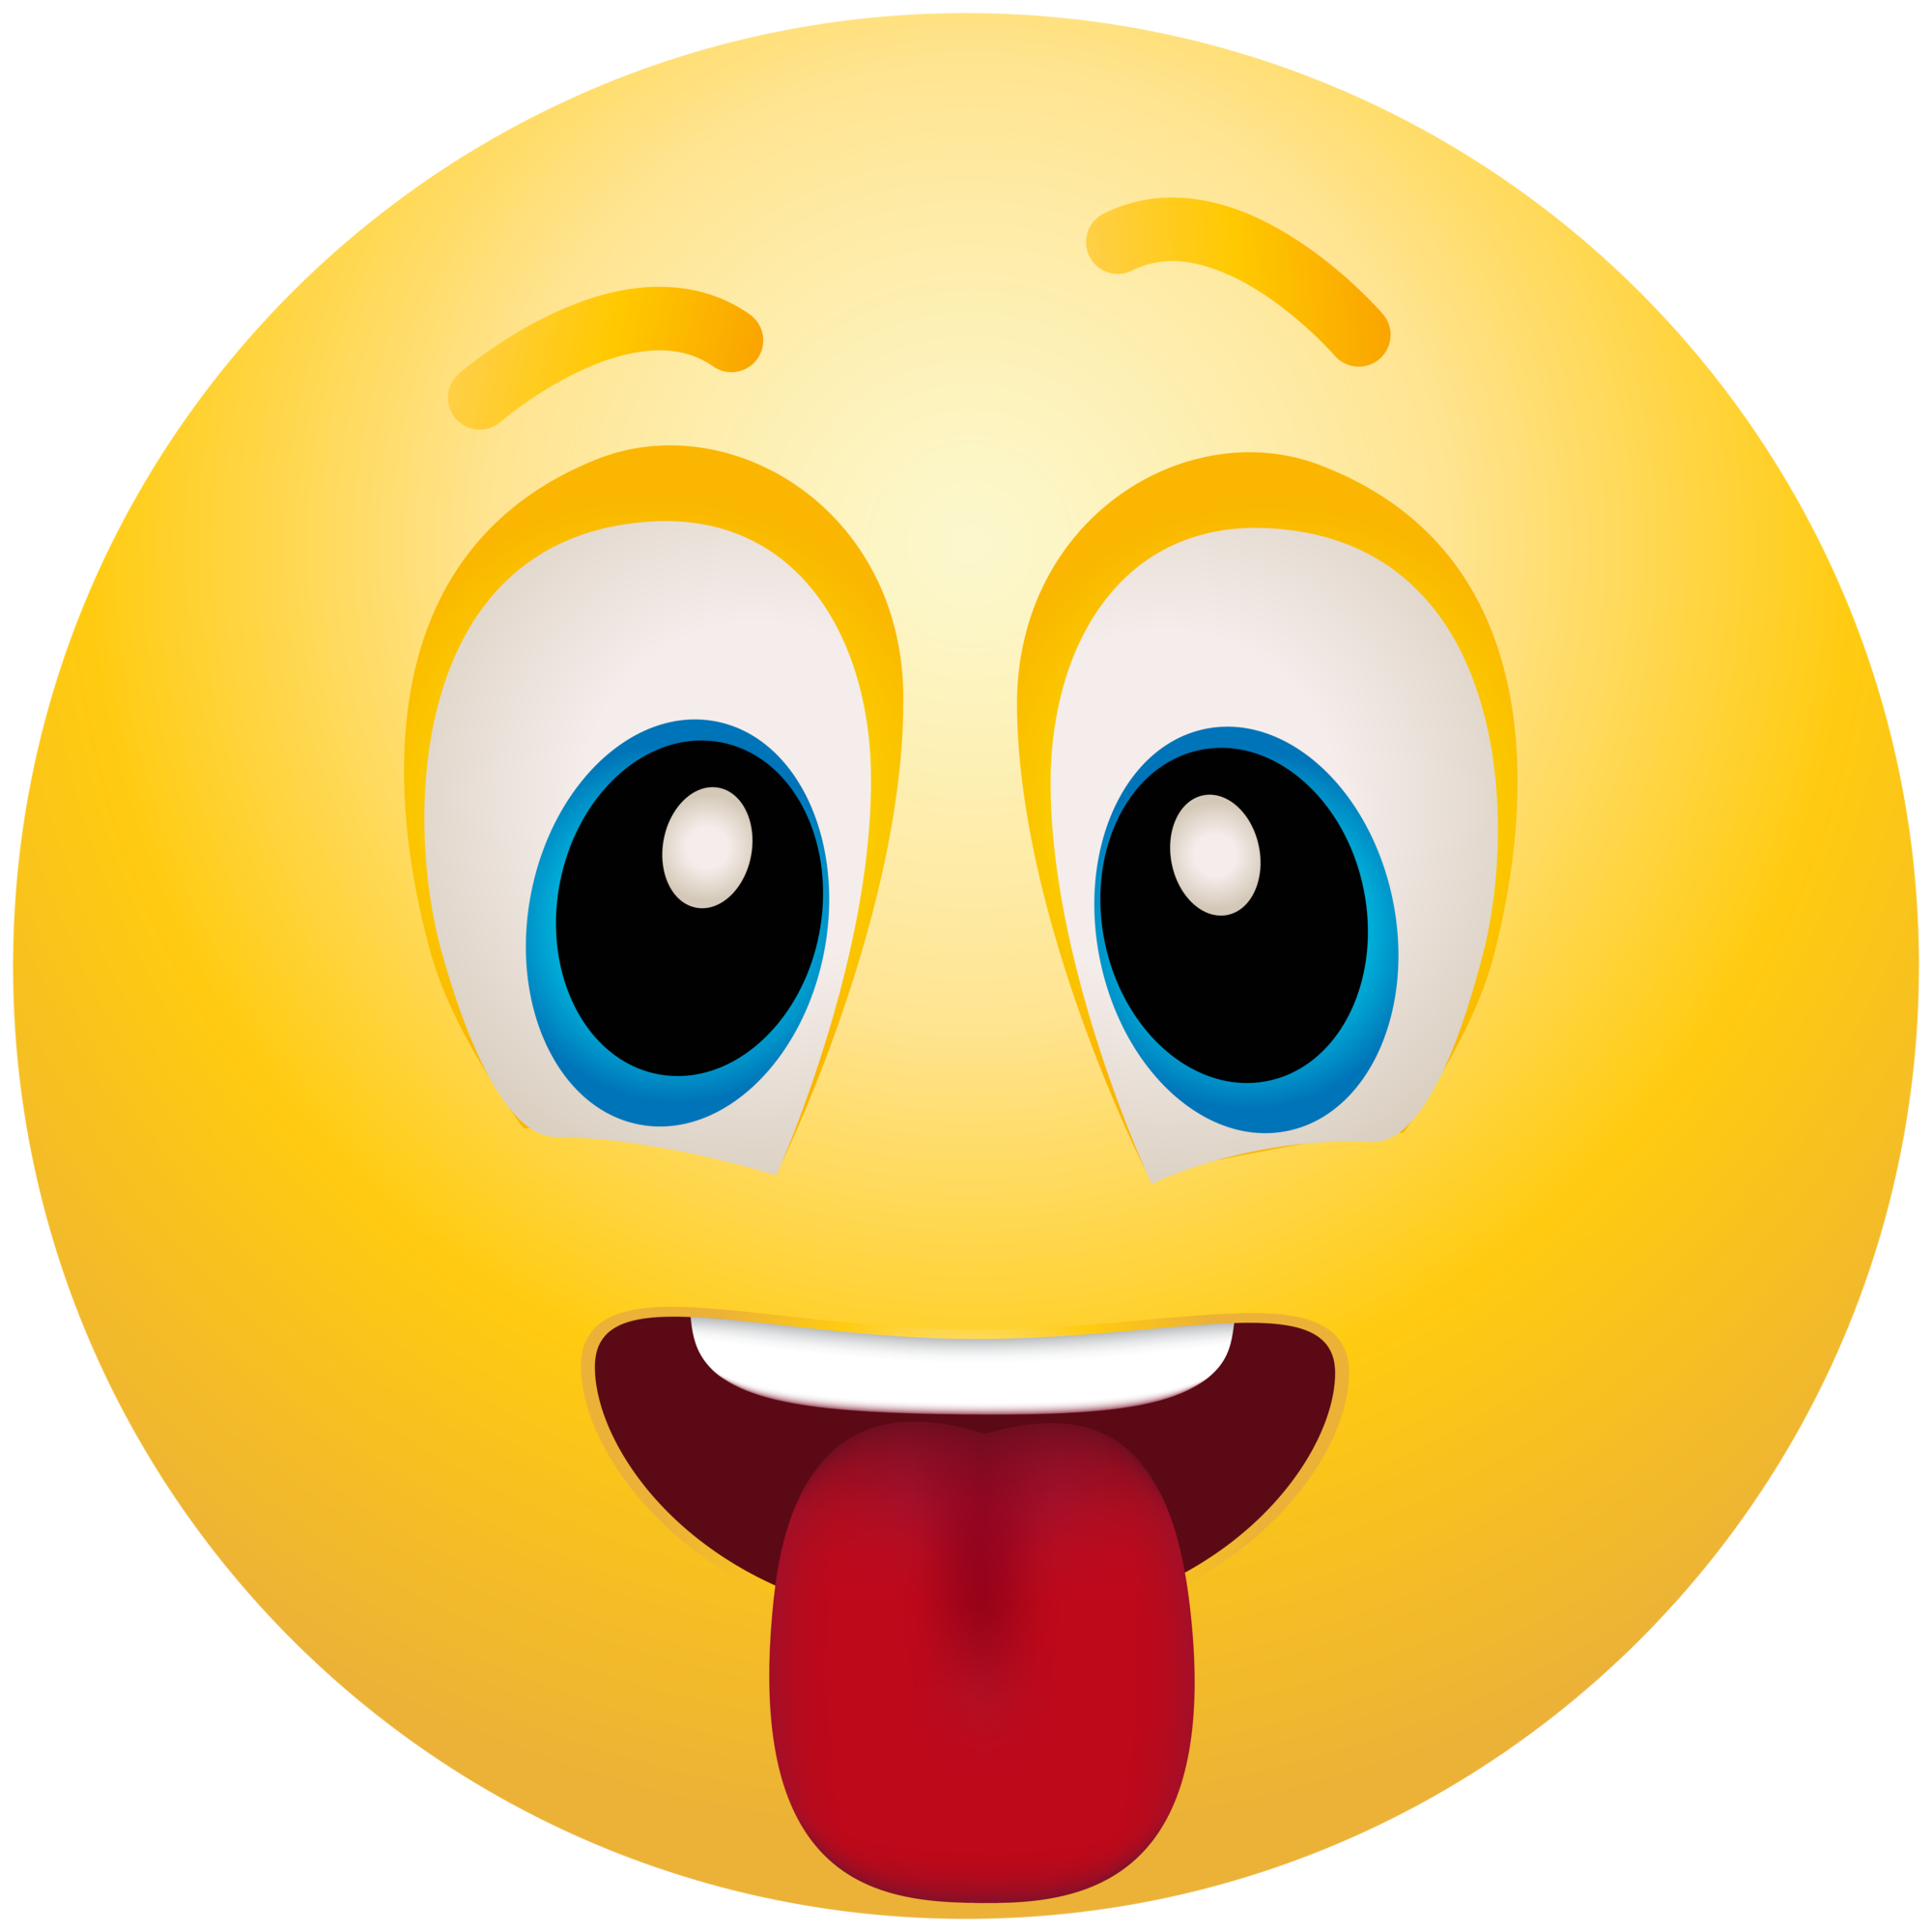 Tongue Out emoticon emoji Clipart info